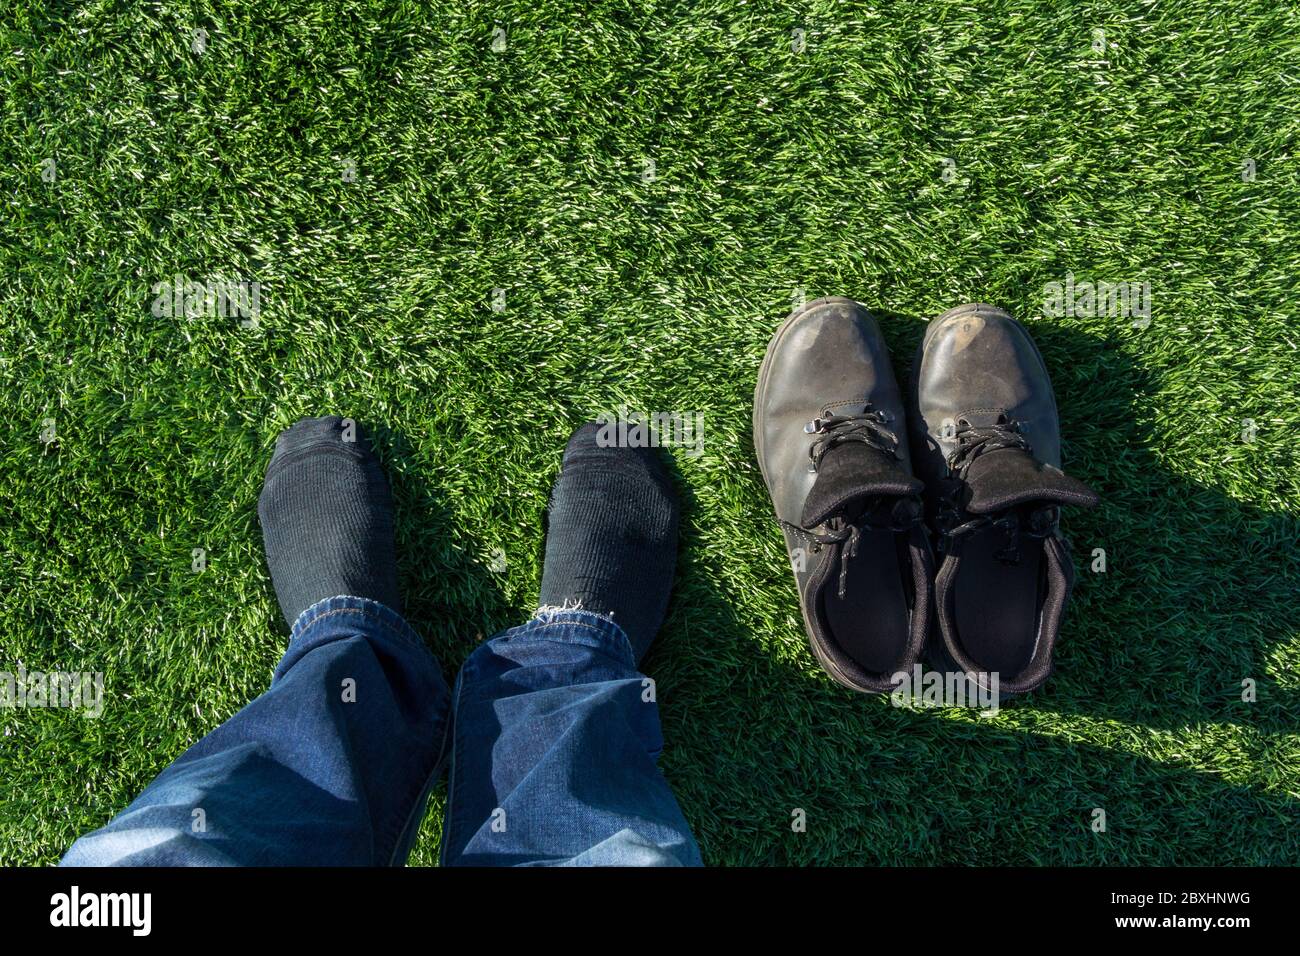 Legs of a worker without shoes on a soccer field. The man took off his shoes and stood on the football field in socks. Green grass and white border li Stock Photo